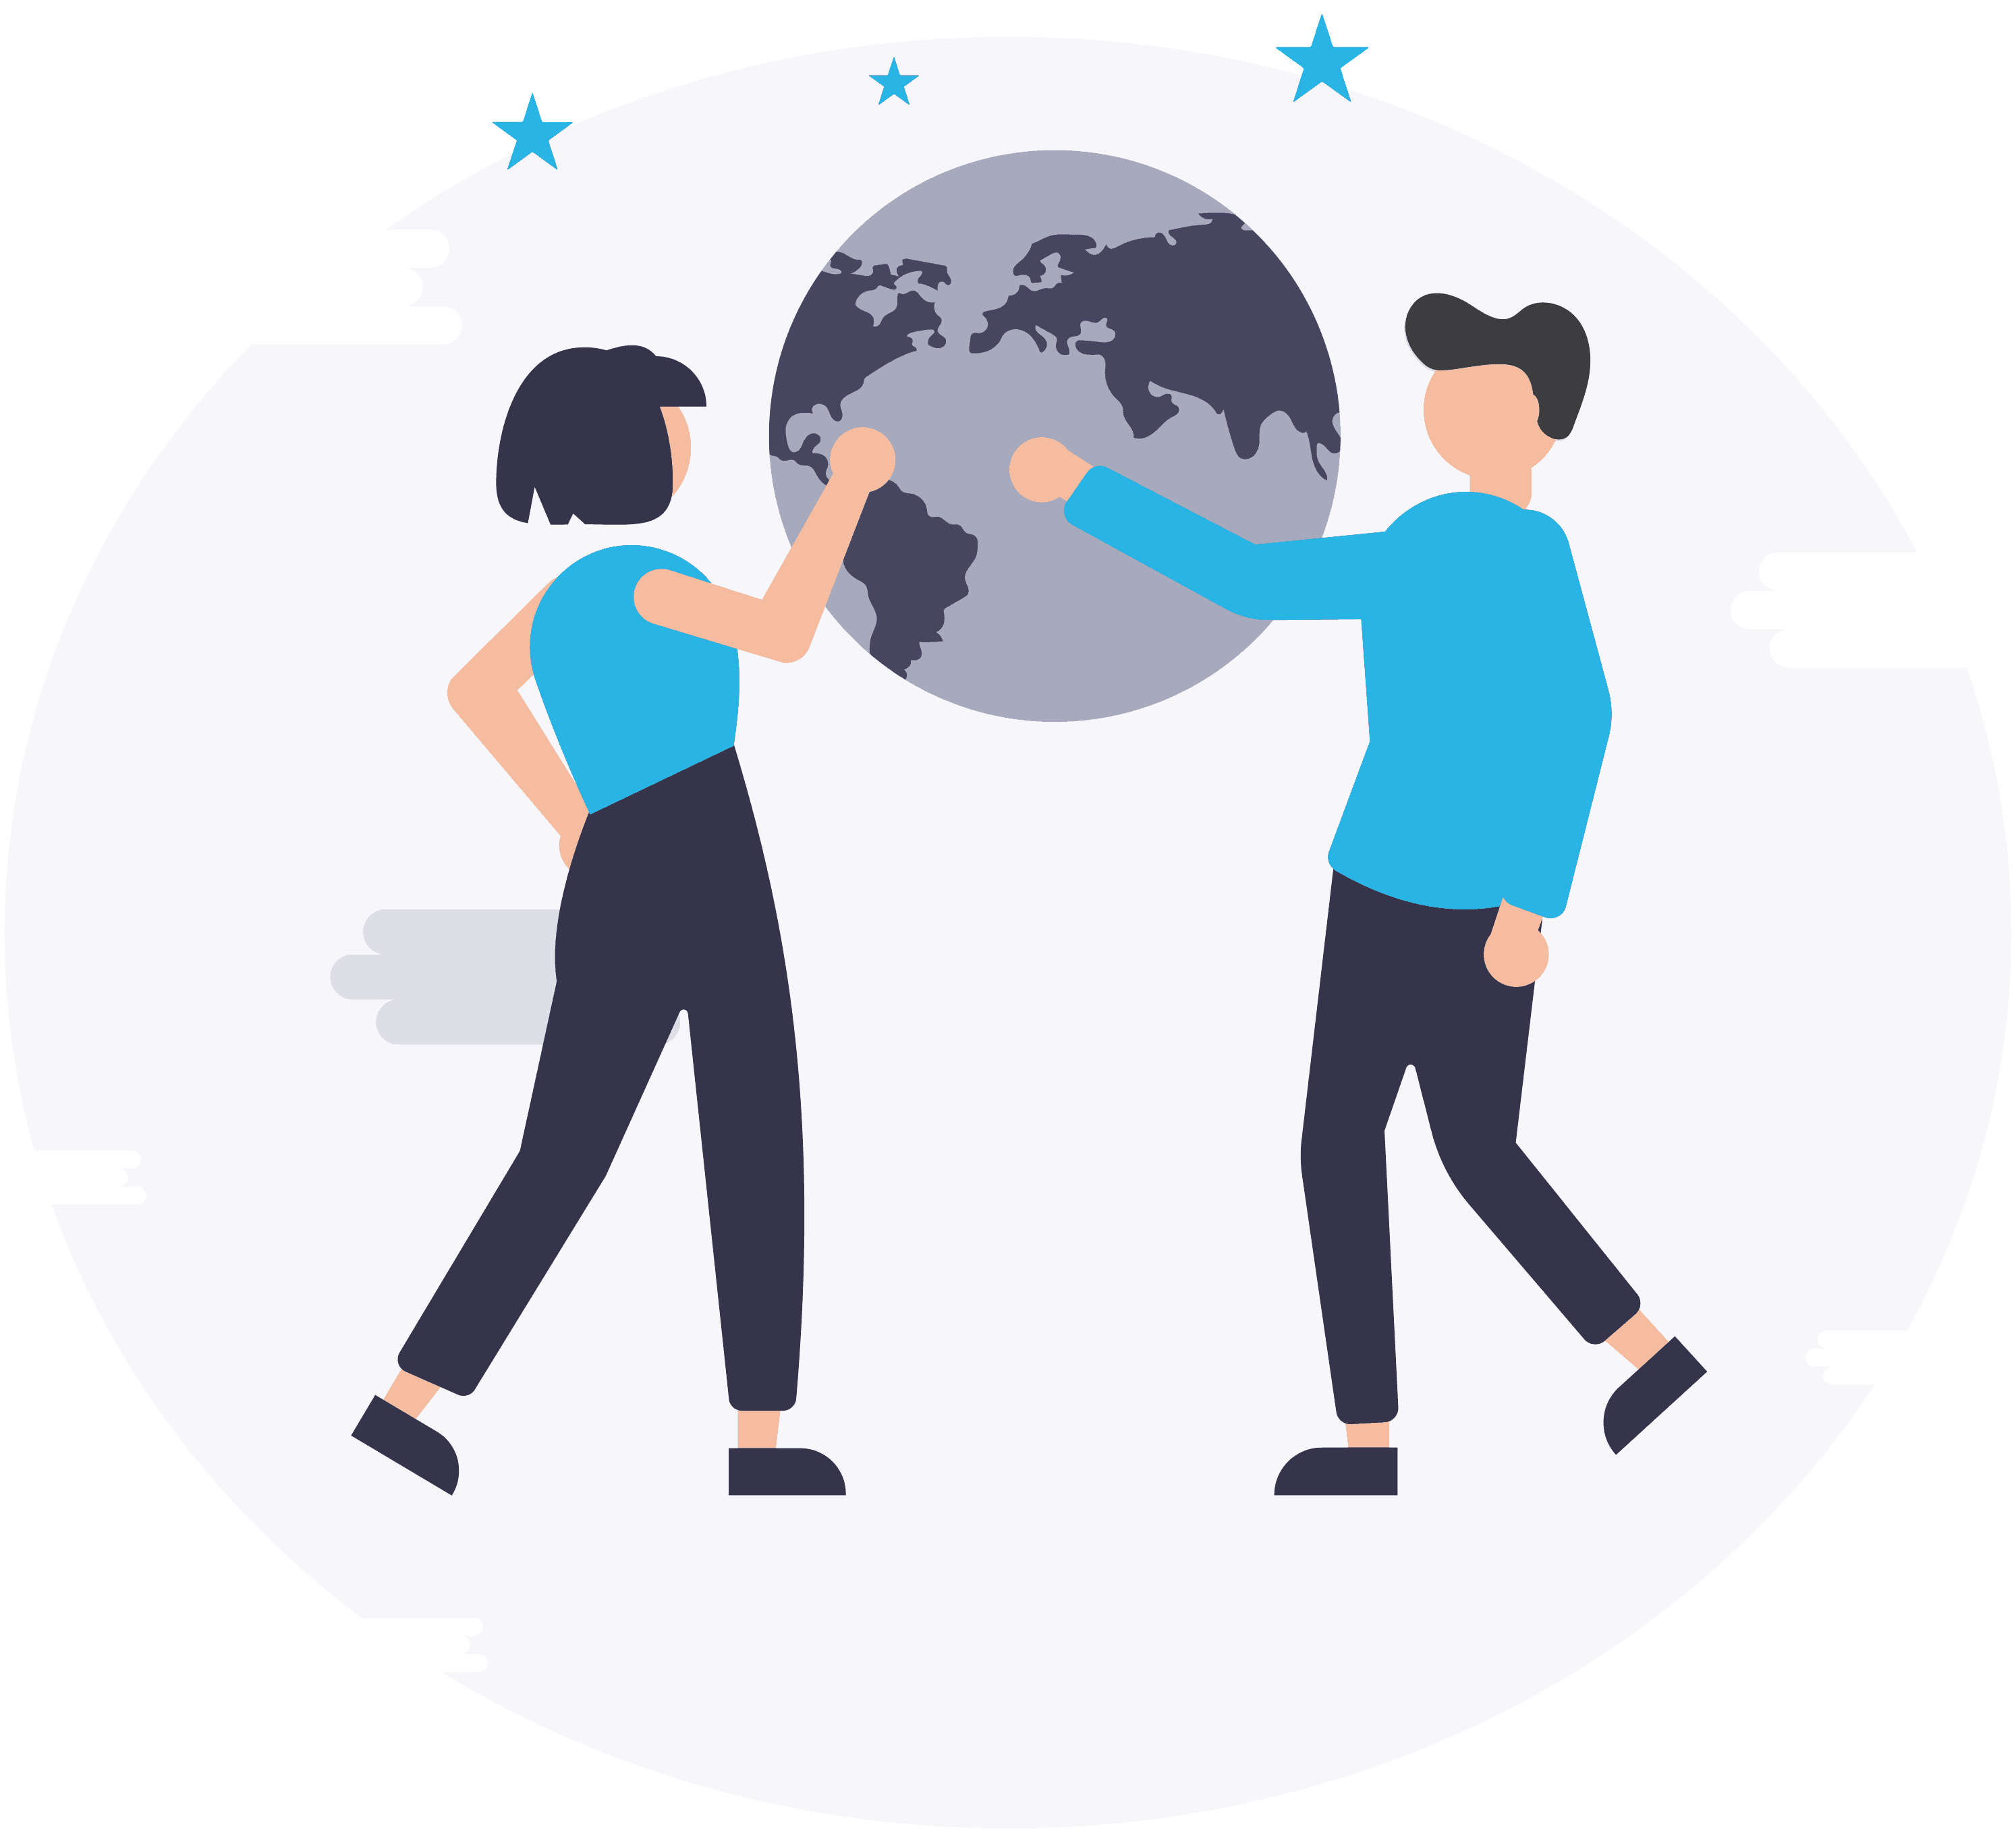 illustration icon of man and woman fist bumping in front of a globe